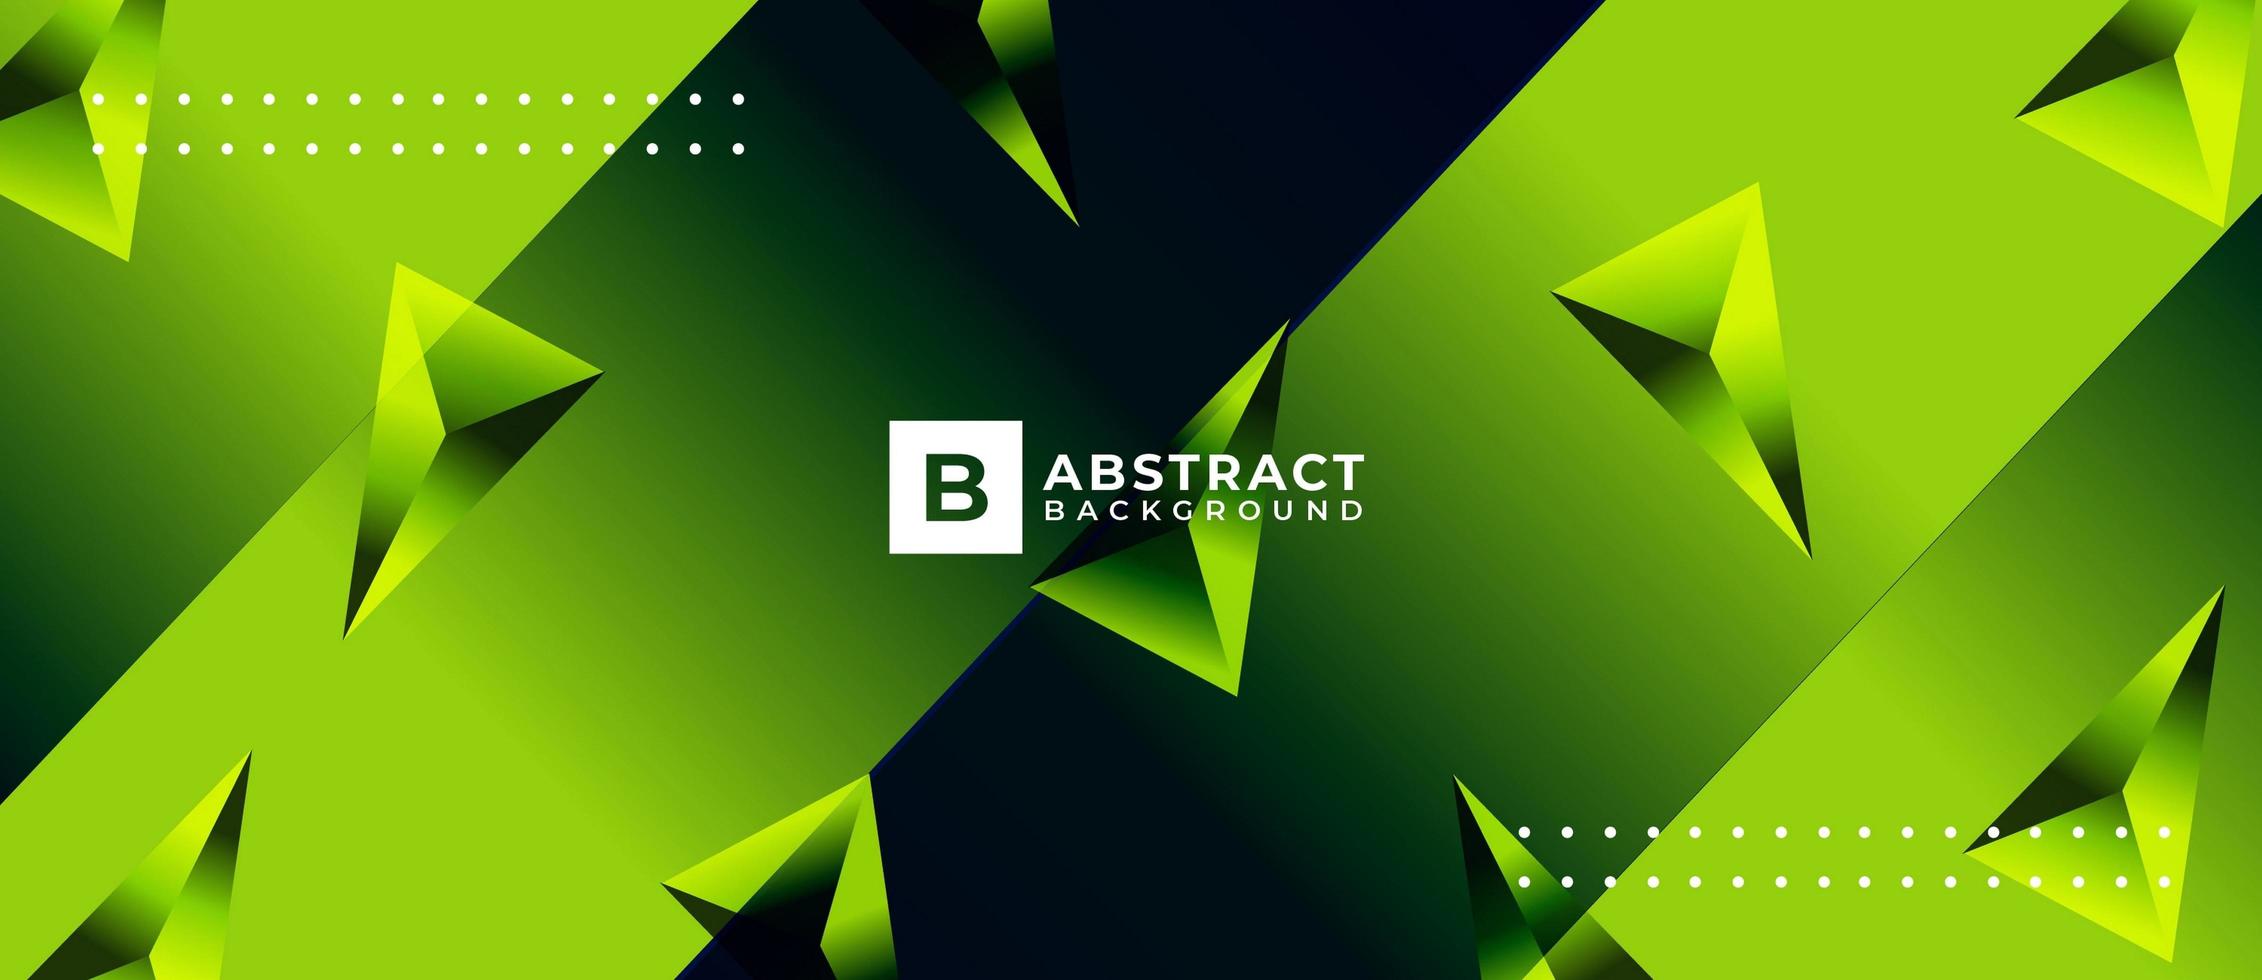 Geometric Polygon Abstract Green Abstract Background vector